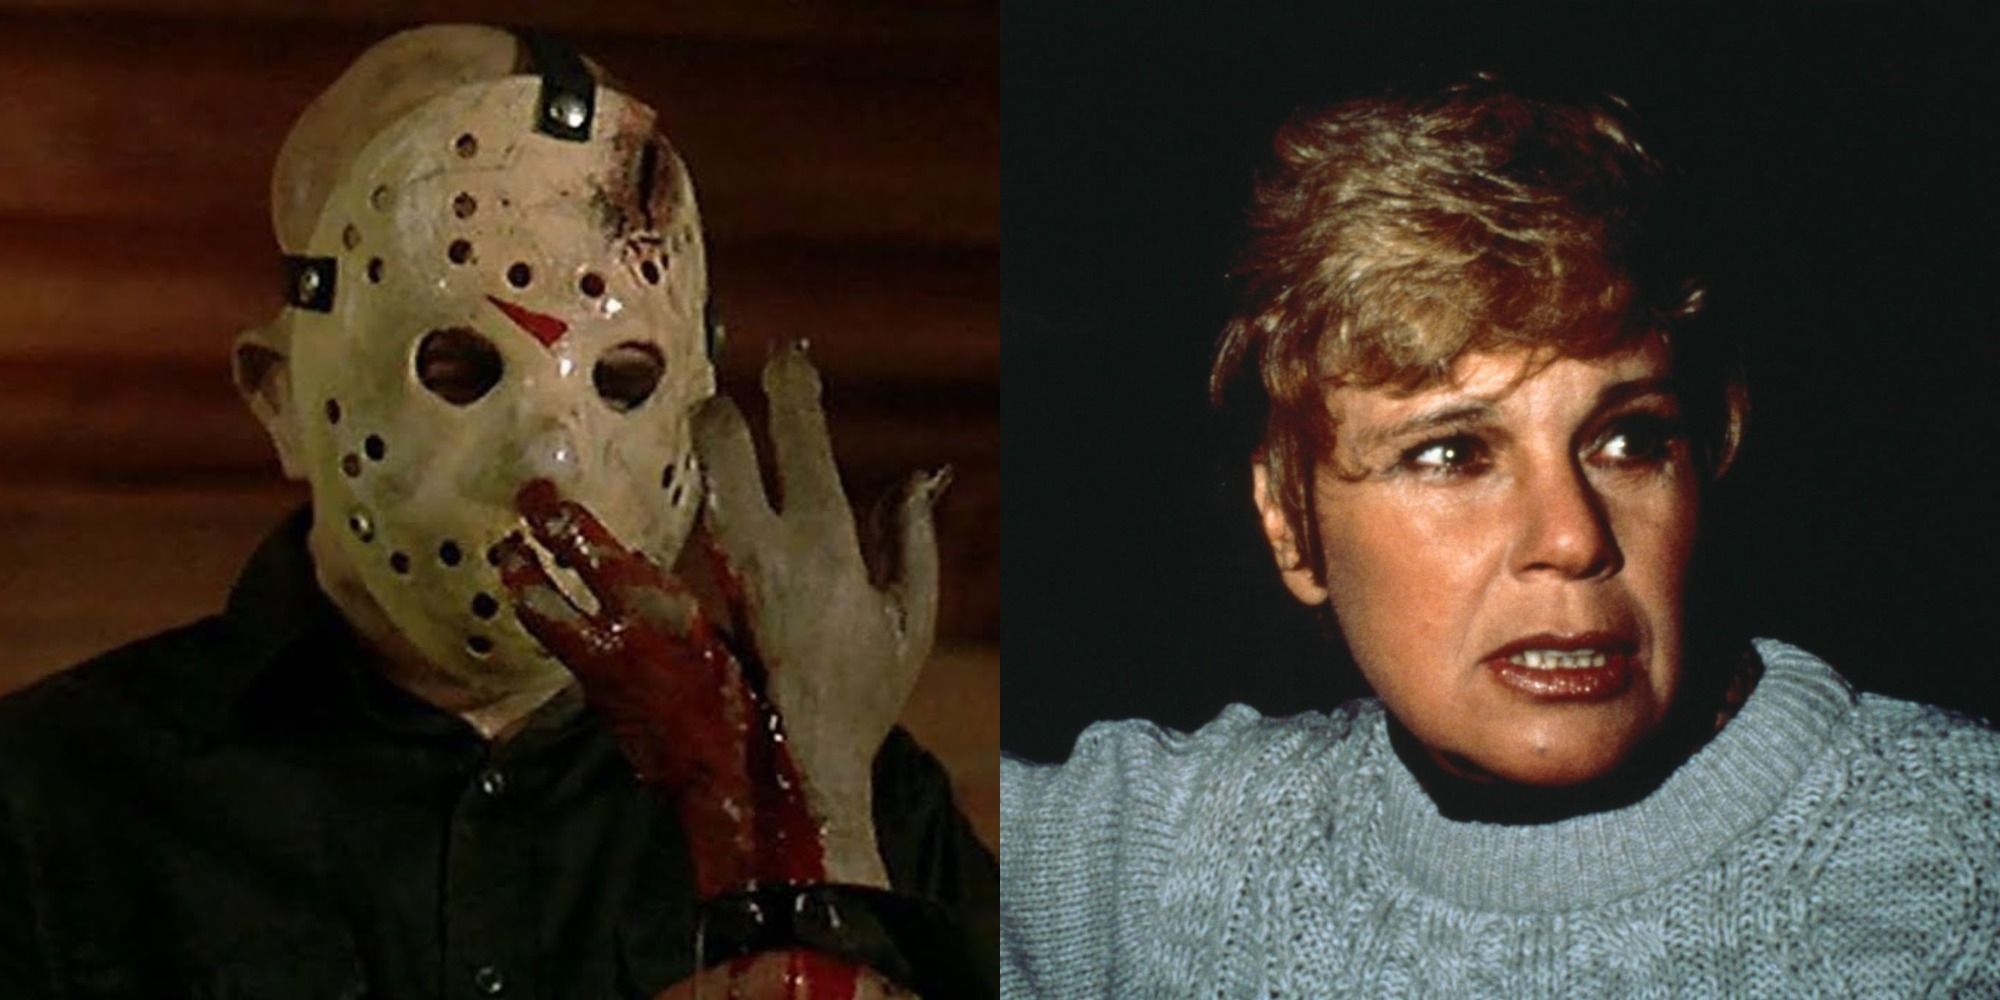 Split image showing Jason and Pamela in Friday the 13th